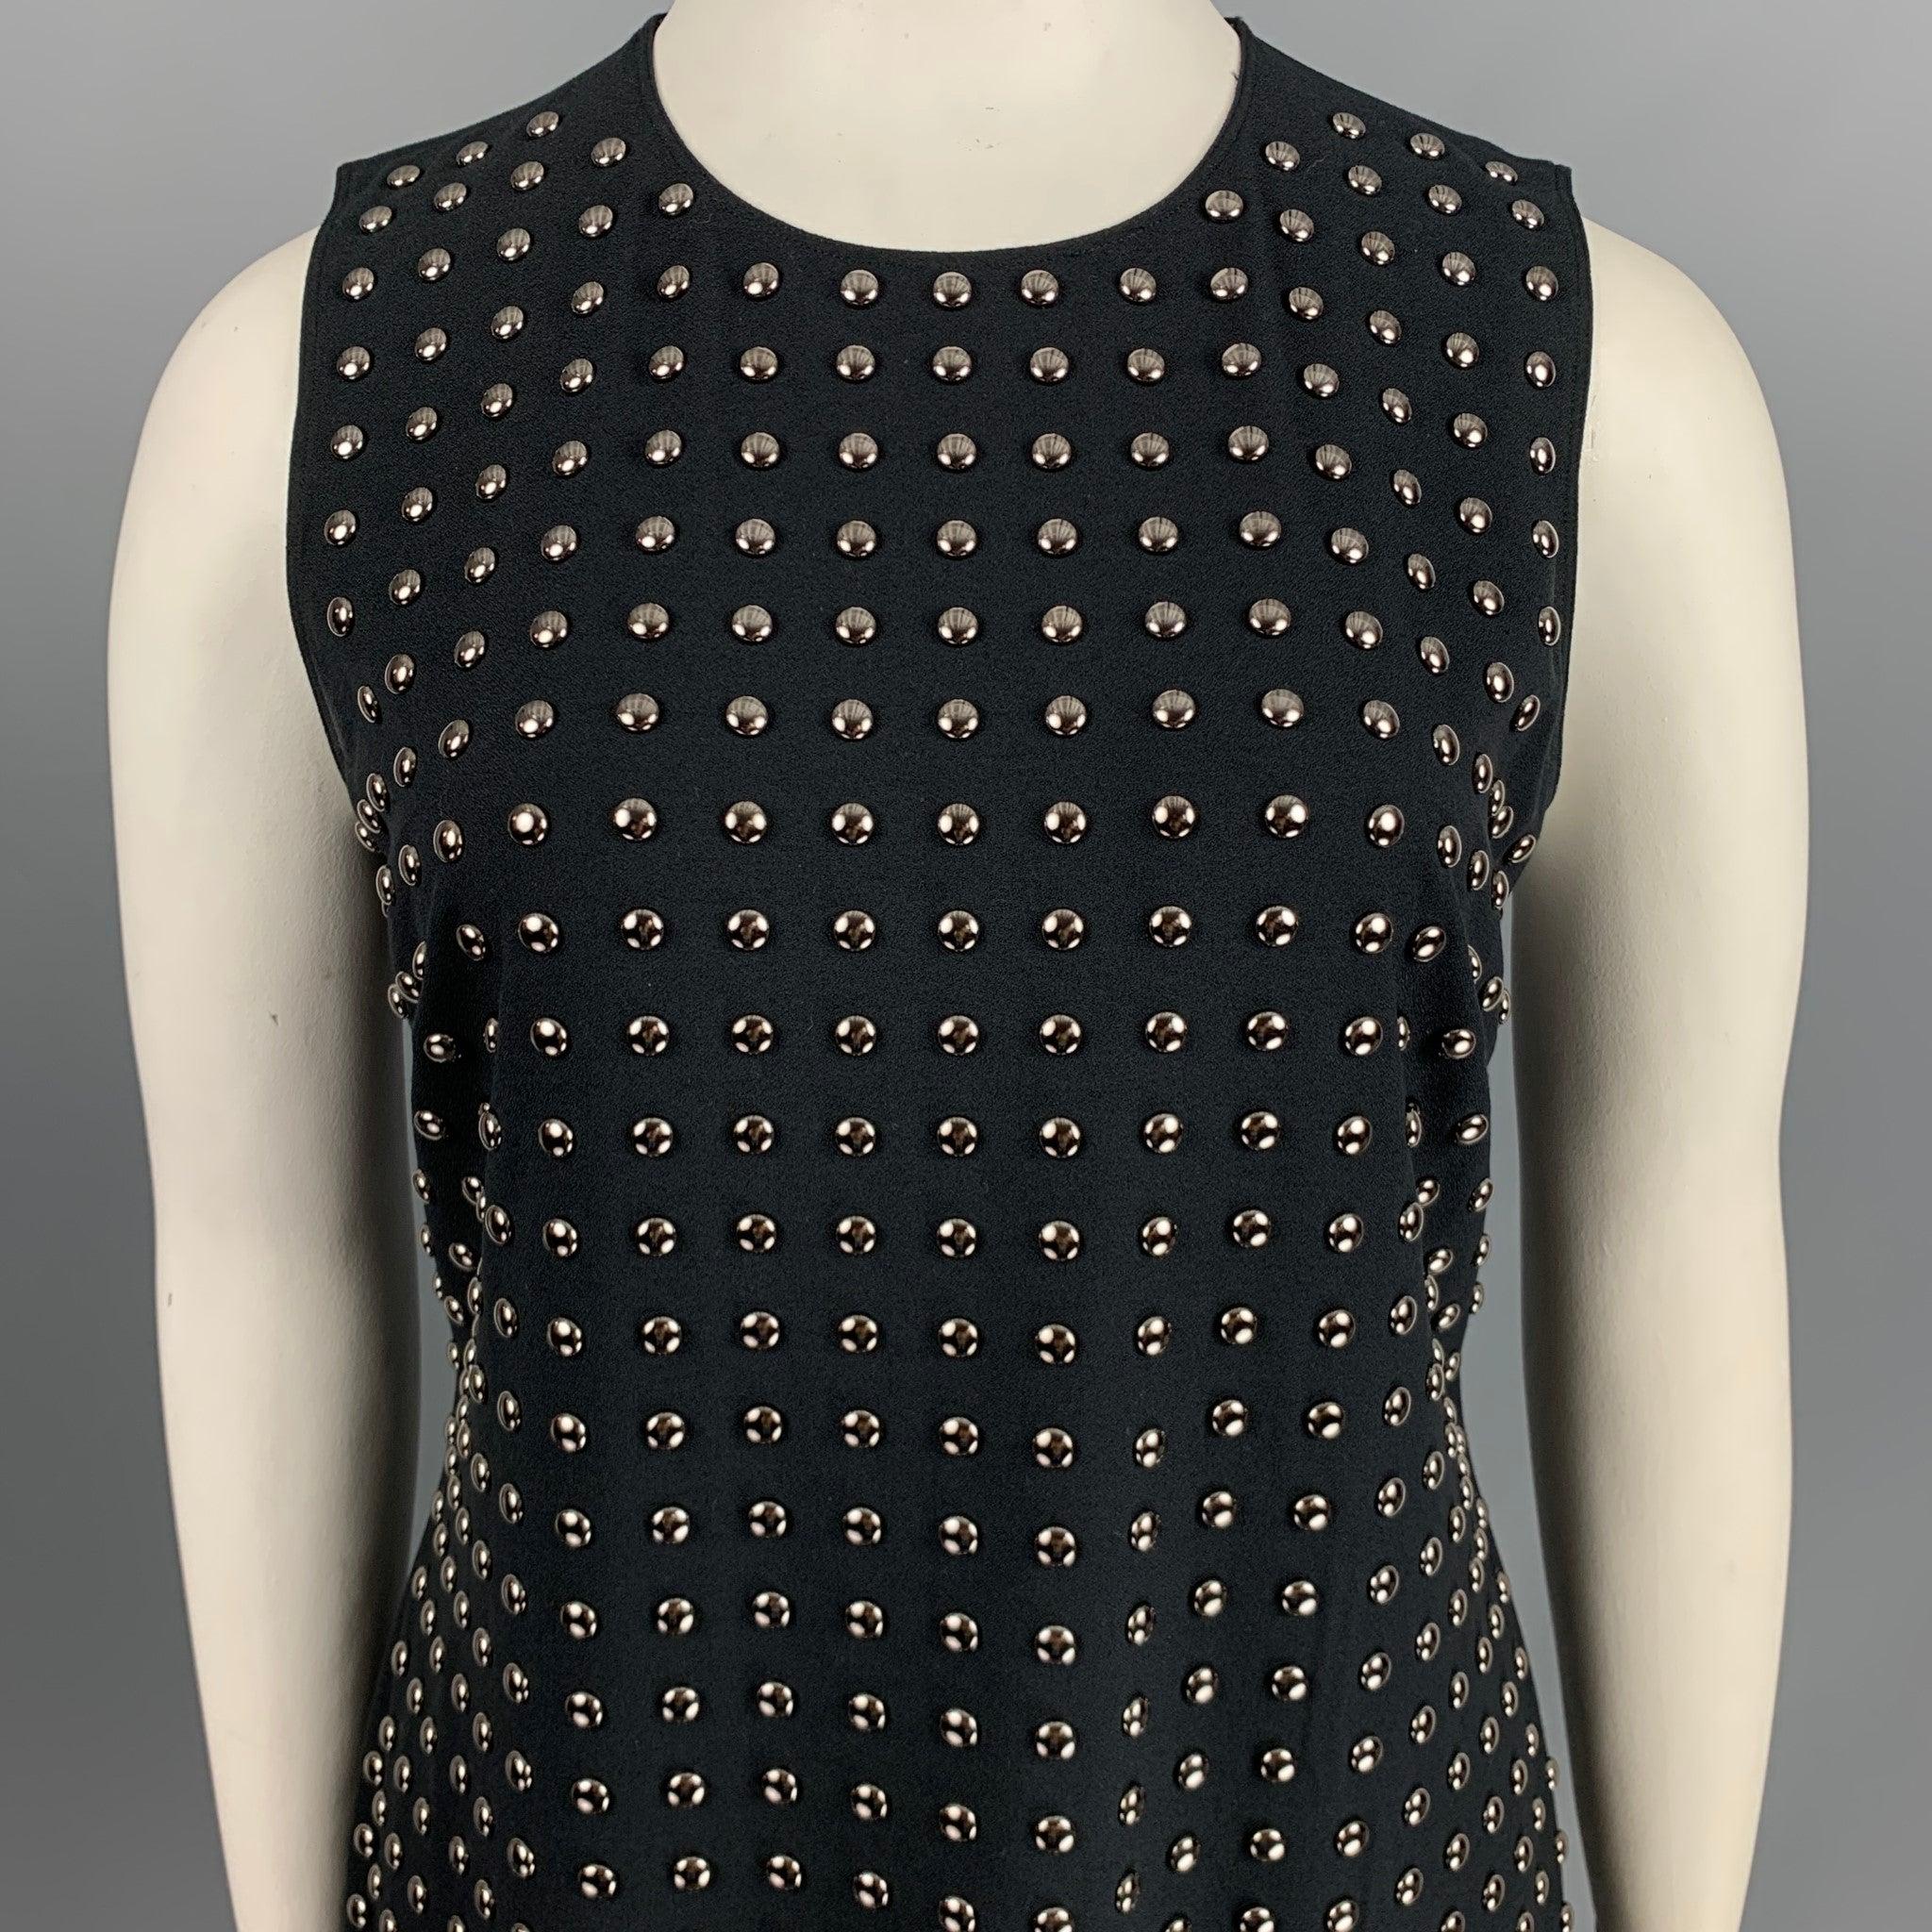 BURBERRY LONDON dress in a black polyester blend crepe fabric featuring silver tone studded front, sleeveless style, and a back zipper closure.Very Good Pre-Owned Condition. Marks under arms. 

Marked:  10 

Measurements: 
 
Shoulder: 15 inches